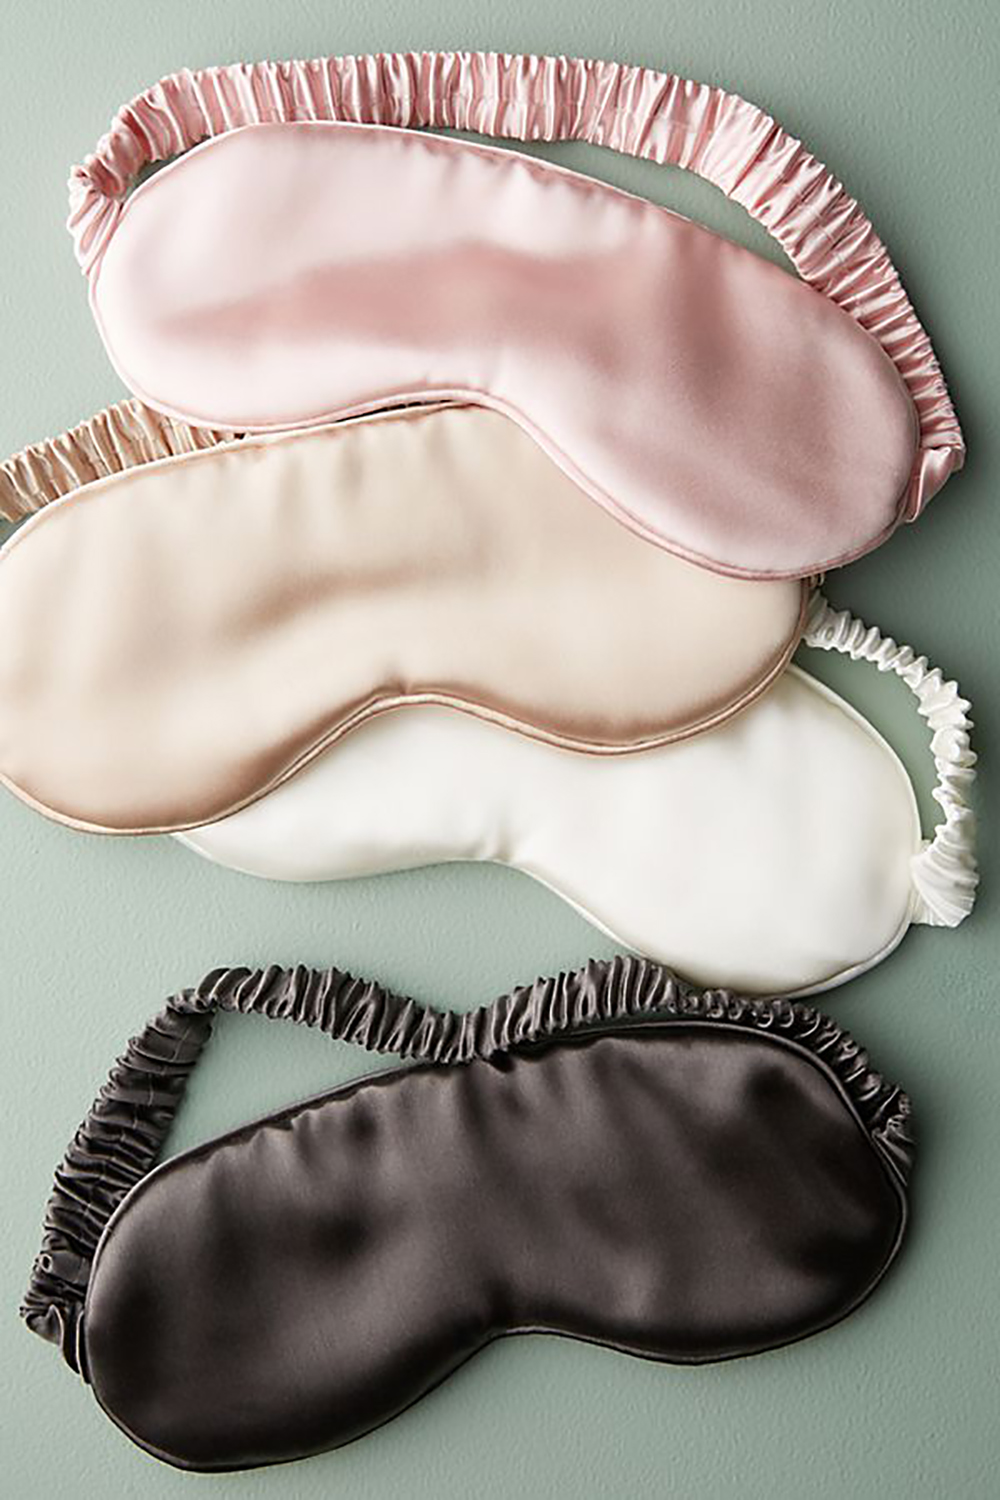 Slip Silk Sleep Mask This luxurious, pure silk sleep mask was refined and perfected over the course of ten years to ensure it delivers the most restorative beauty rest. Crafted from long-strand mulberry silk both inside and out, it protects delicate skin from the tugging effects of tossing and turning.